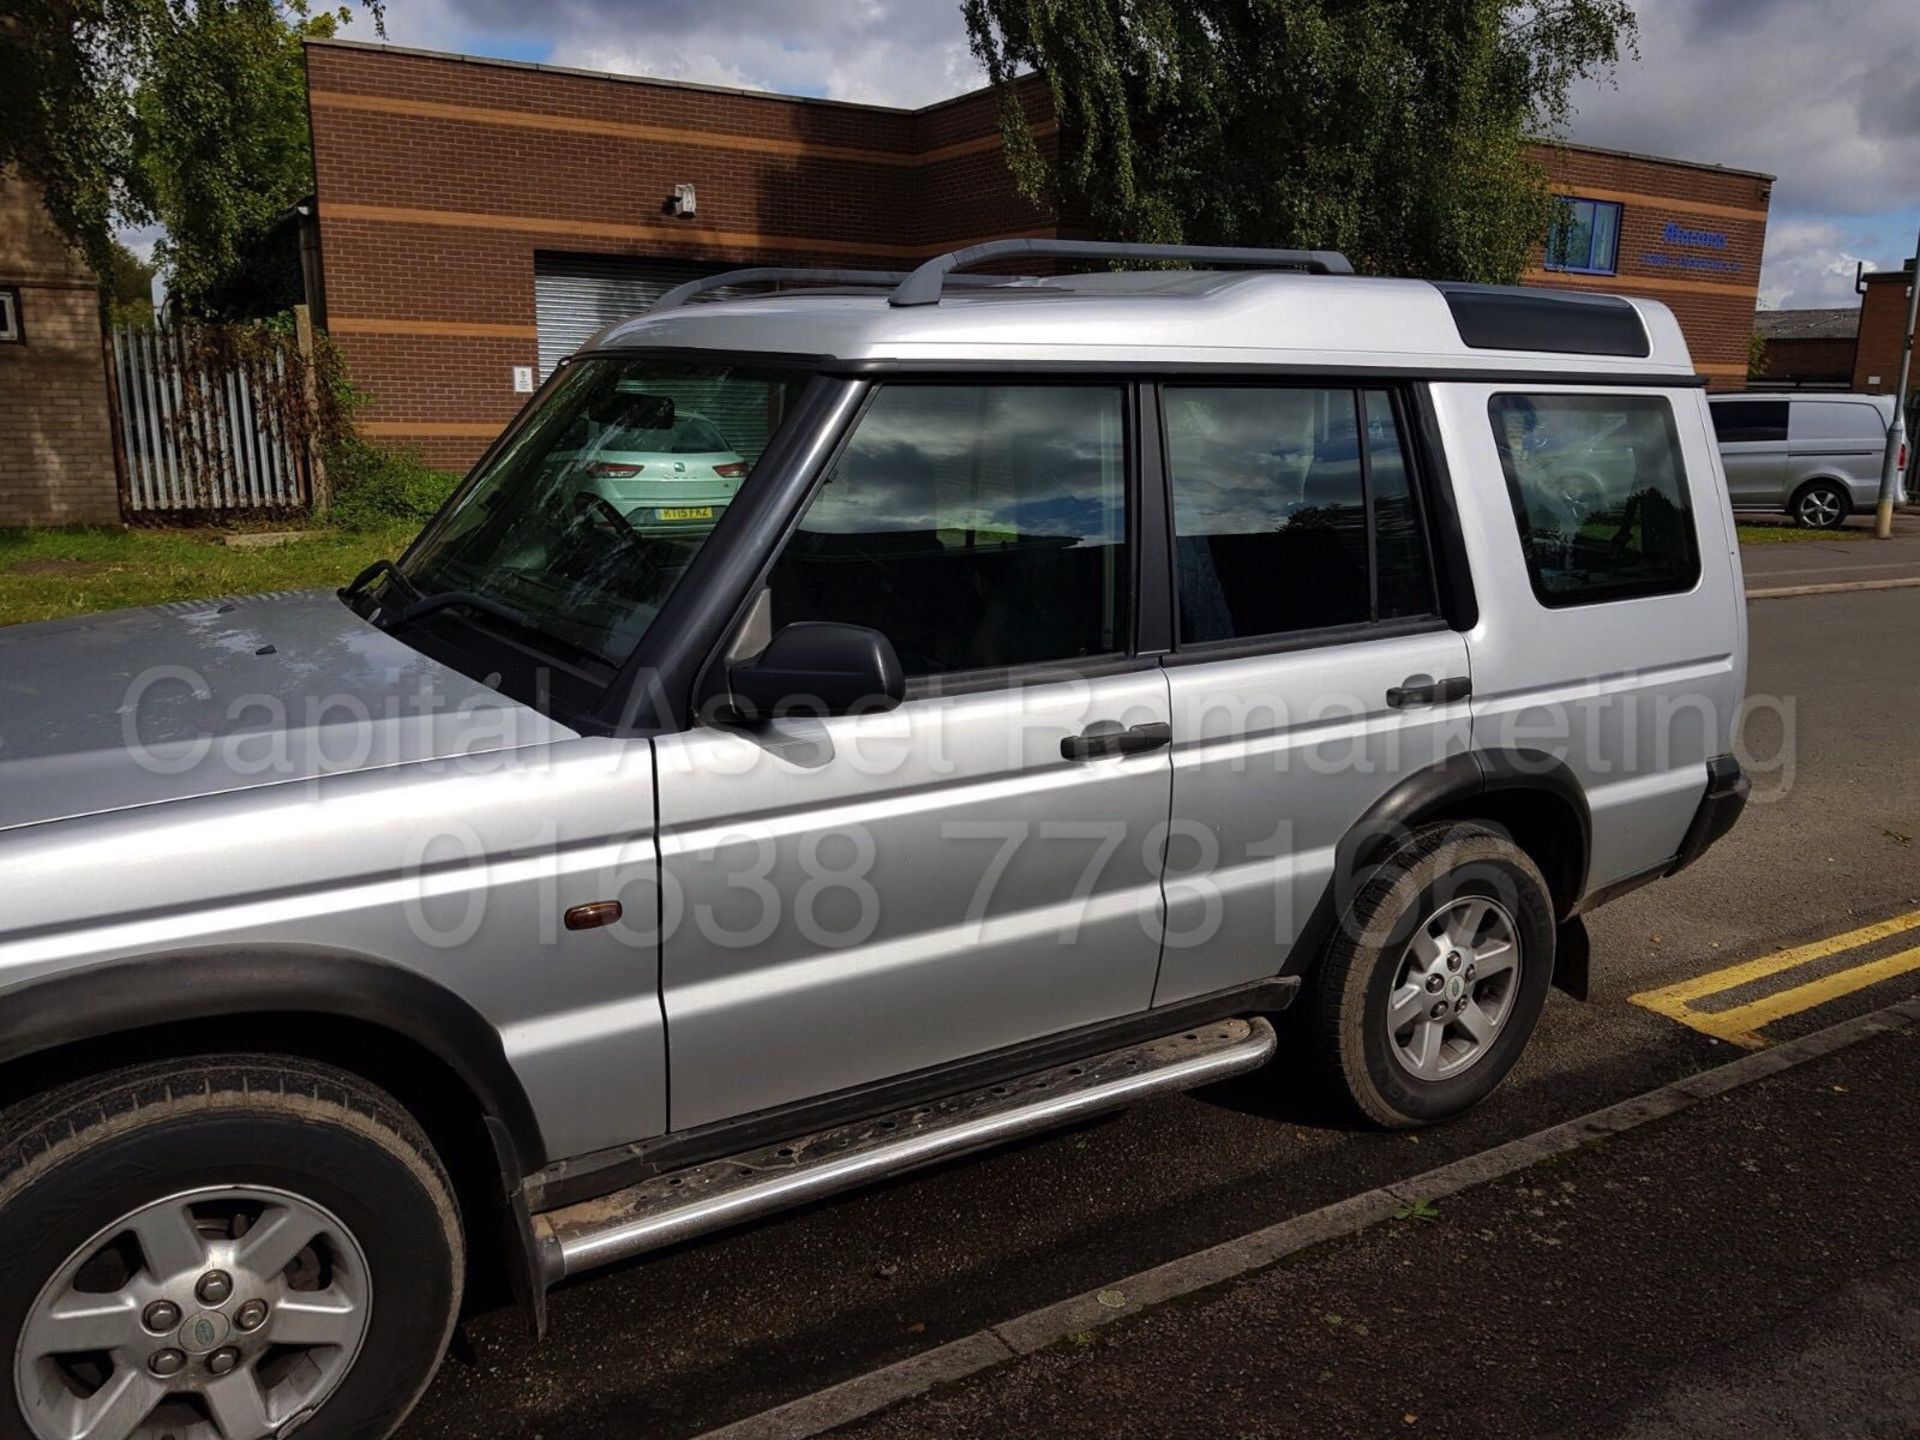 (On Sale) LAND ROVER DISCOVERY 'GS EDITION' (2004 MODEL) 'TD5 - AUTO - 7 SEATER' (NO VAT - SAVE 20%) - Image 5 of 16